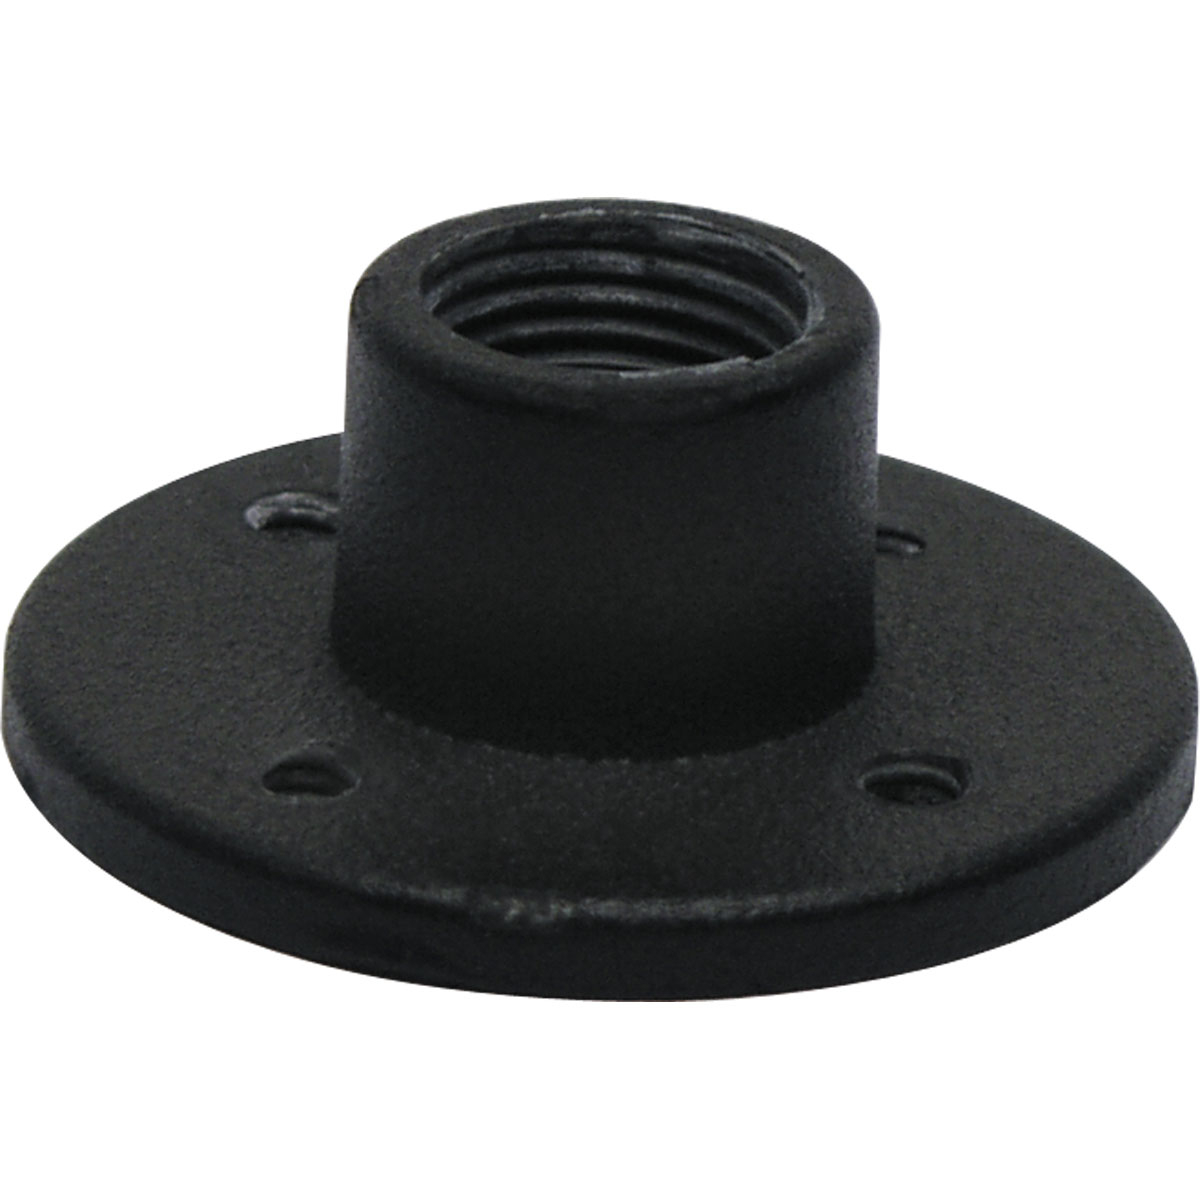 Miniature pedestal mount. Powder-coat painted cast metal. Flanged base for surface mounting on masonry or wood. Ideal for decks, pedestals and atop walls. 1/2 in NPS thread.